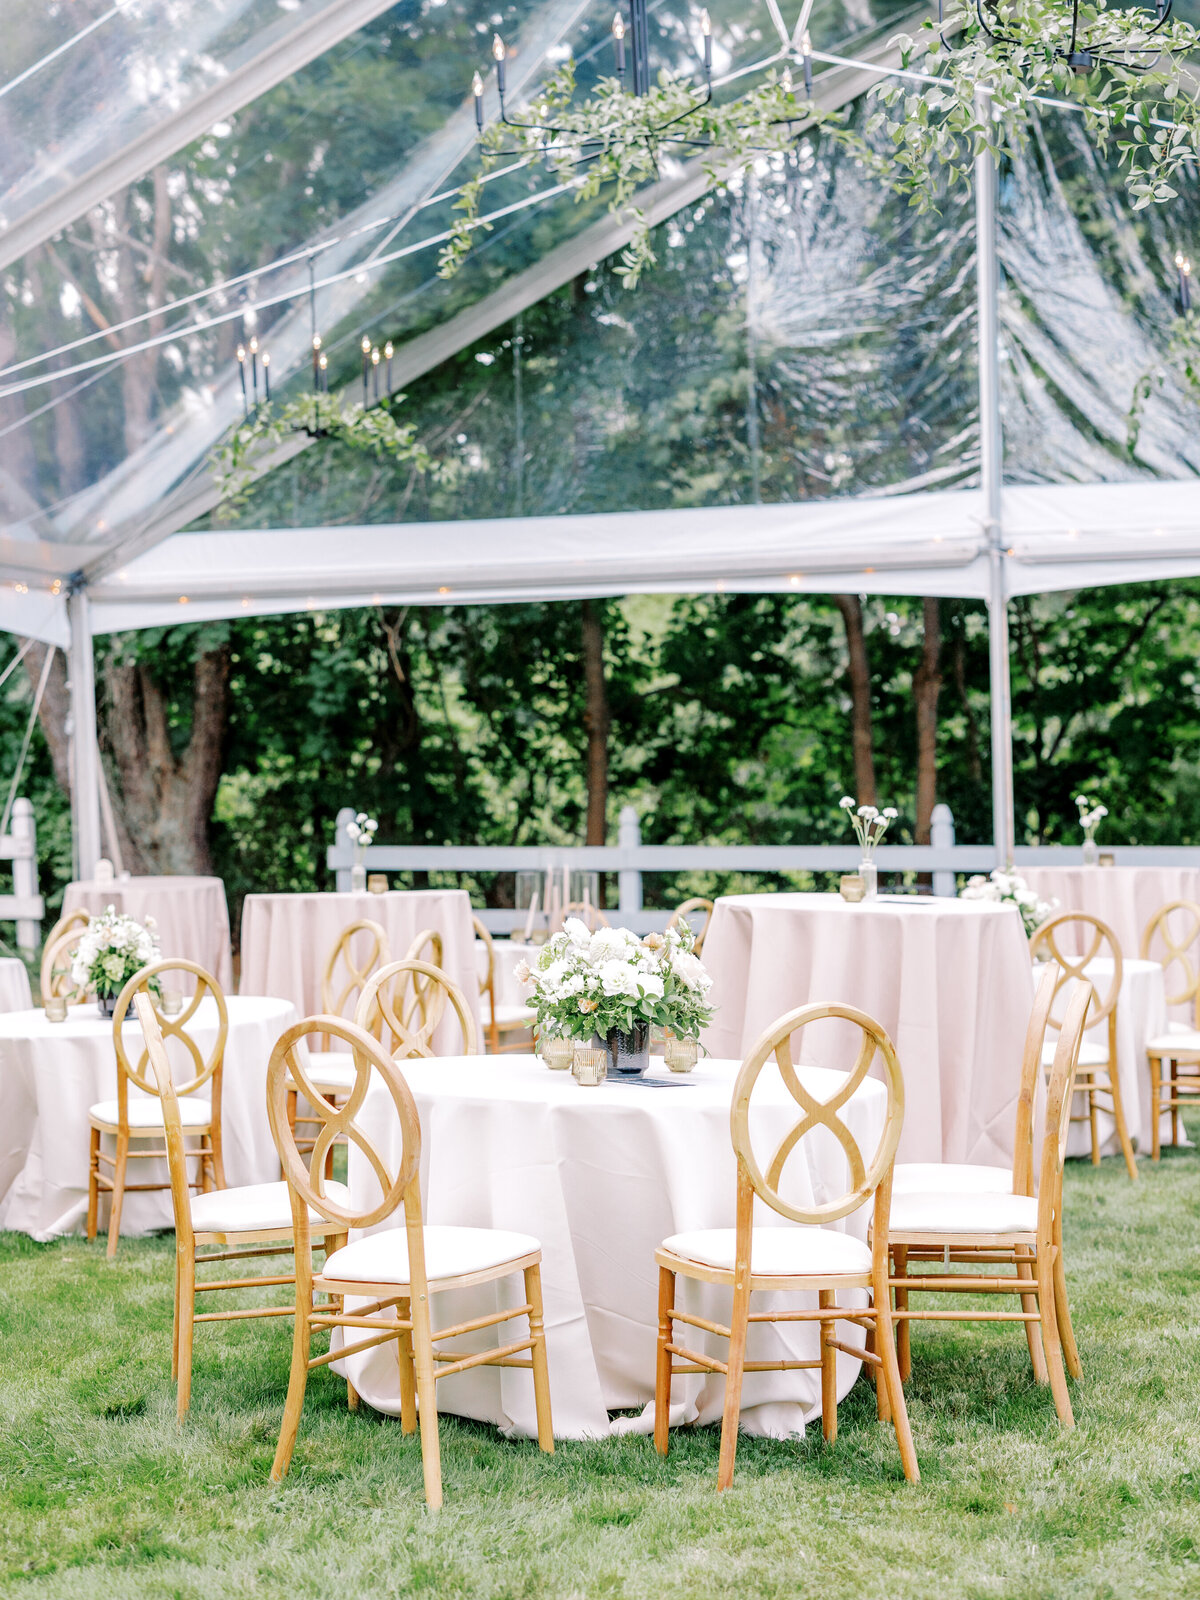 Reception tables with wood chairs and floral centerpieces under a clear tent